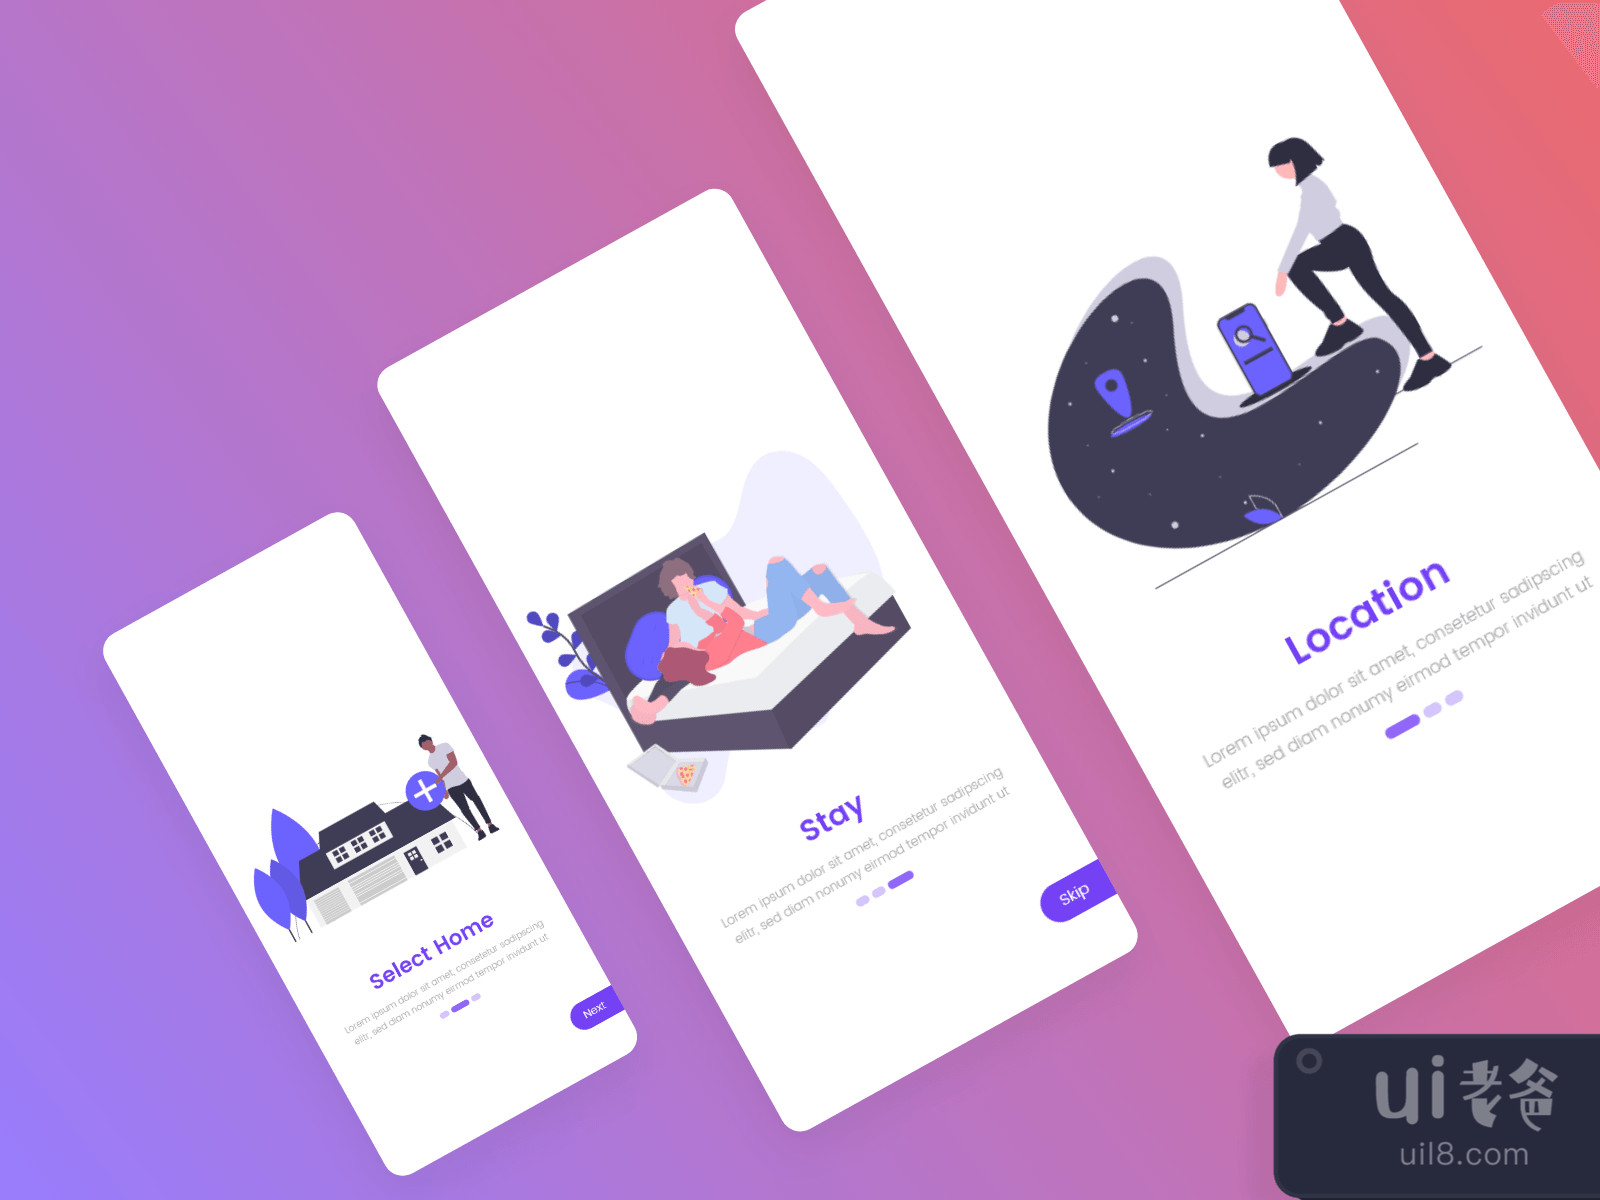 Rent App for Figma and Adobe XD No 4